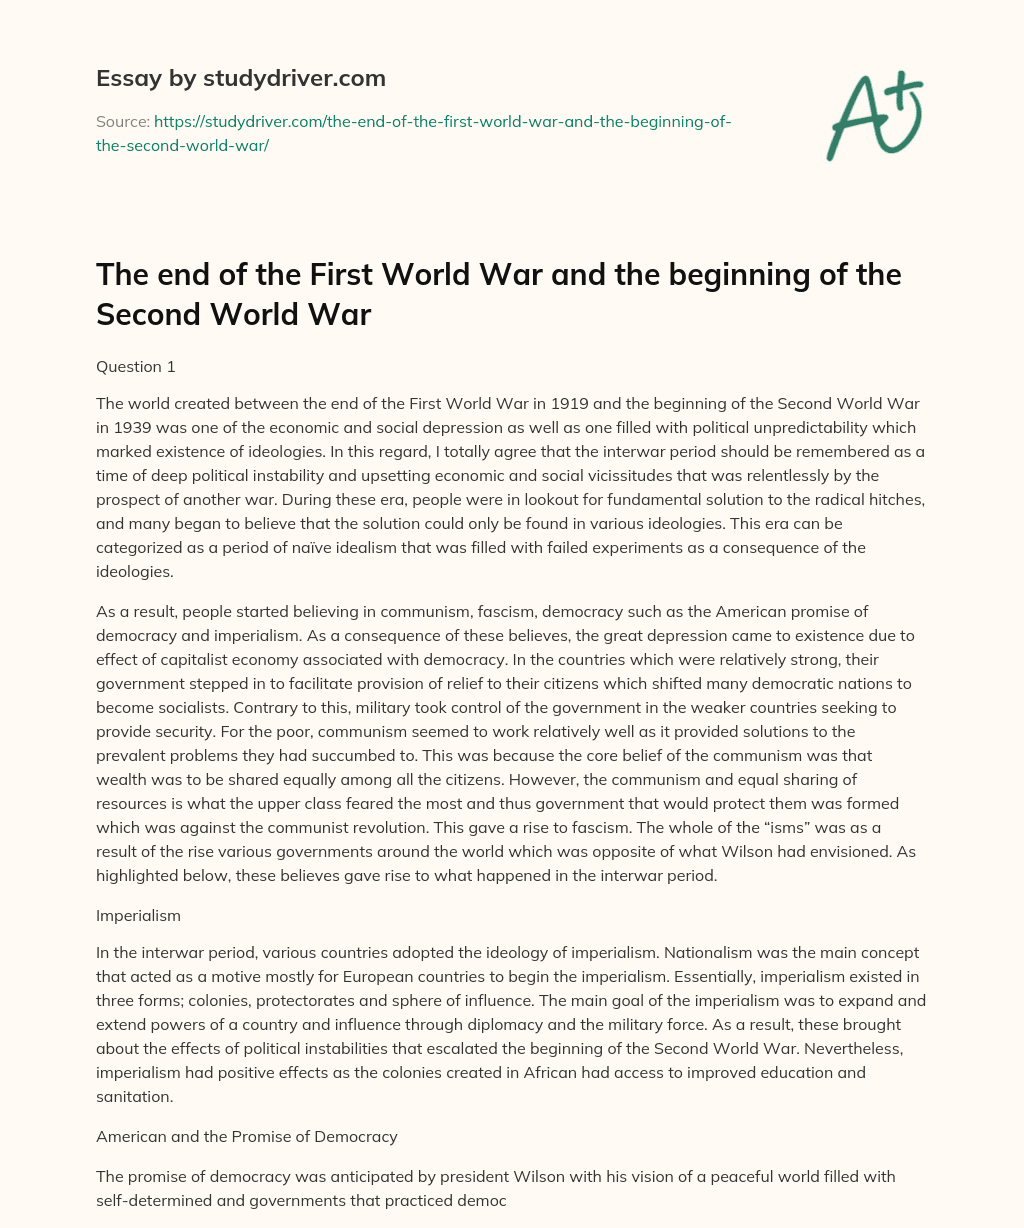 The End of the First World War and the Beginning of the Second World War essay